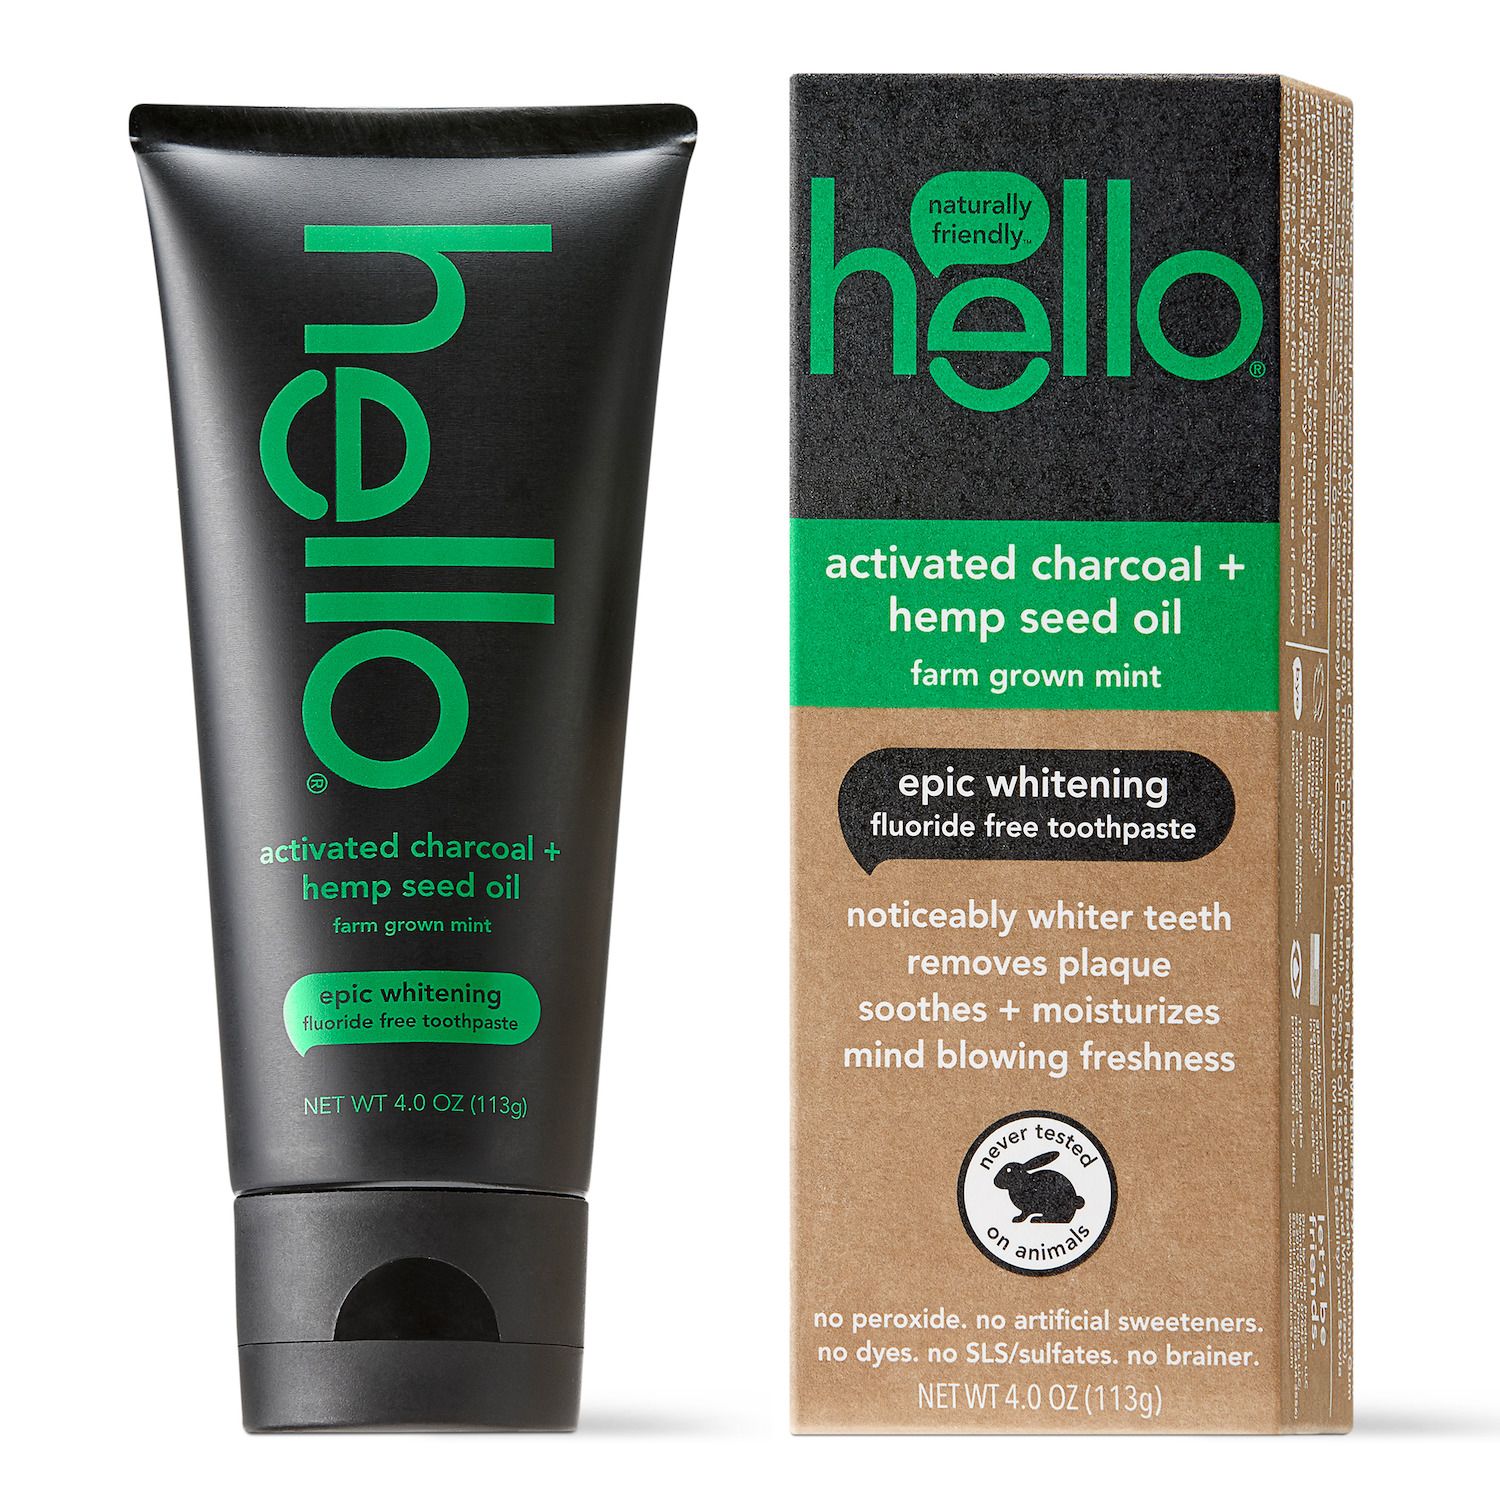 Image for hello Activated Charcoal + Hemp Fluoride Free Toothpaste at Kohl's.